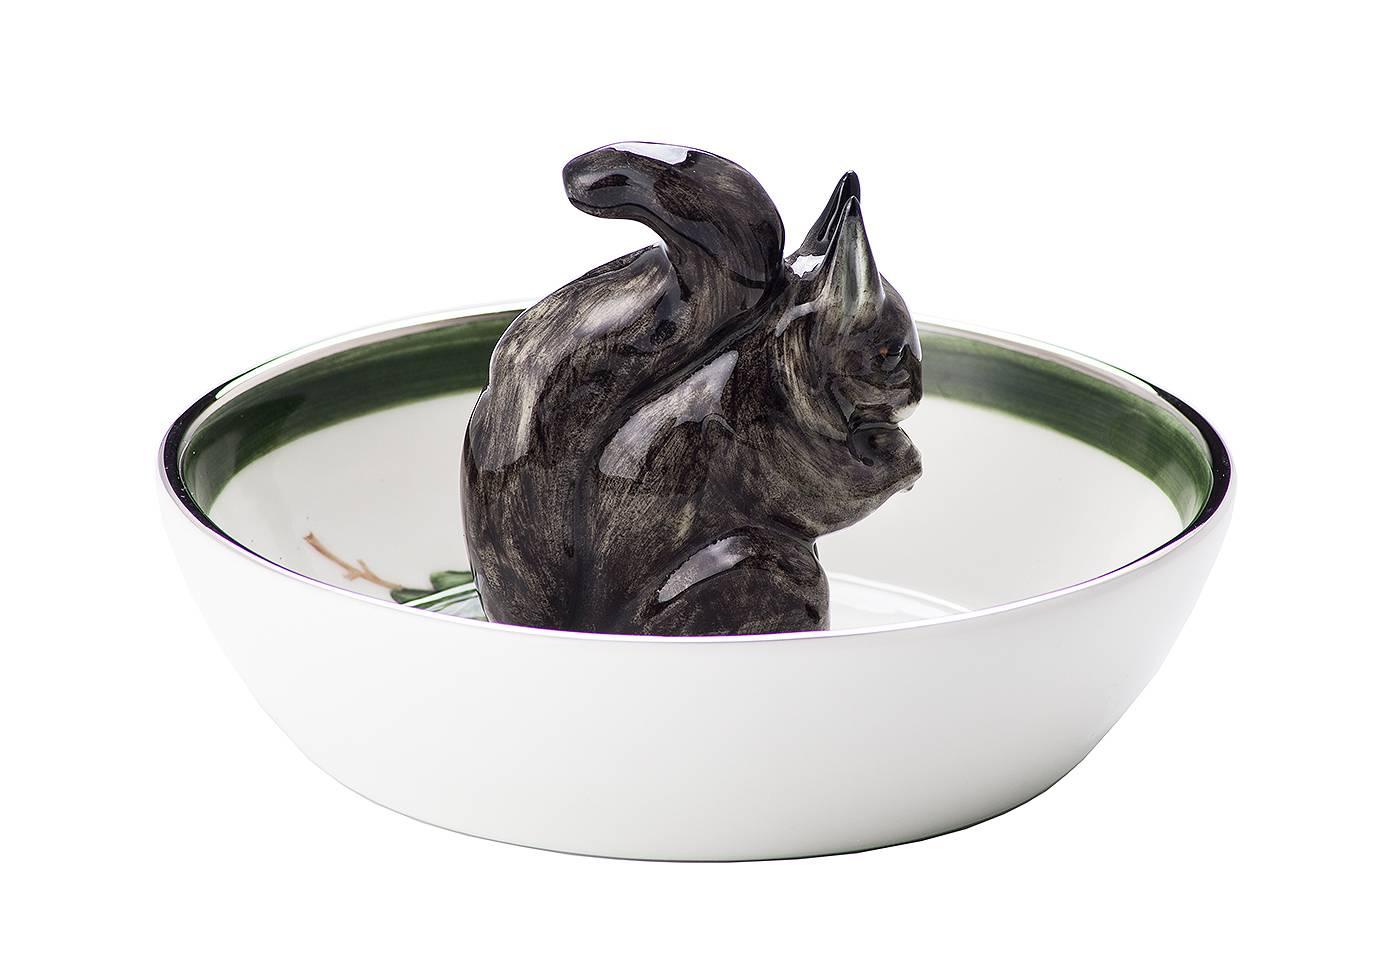 Completely handmade porcelain bowl with a hands-free painted squirrel in brown in the center of the bowl. 24-carat gold rimmed. Comes also in black with platinum frame. Available in 2 sizes. Here shown in the bigger size. Handmade in